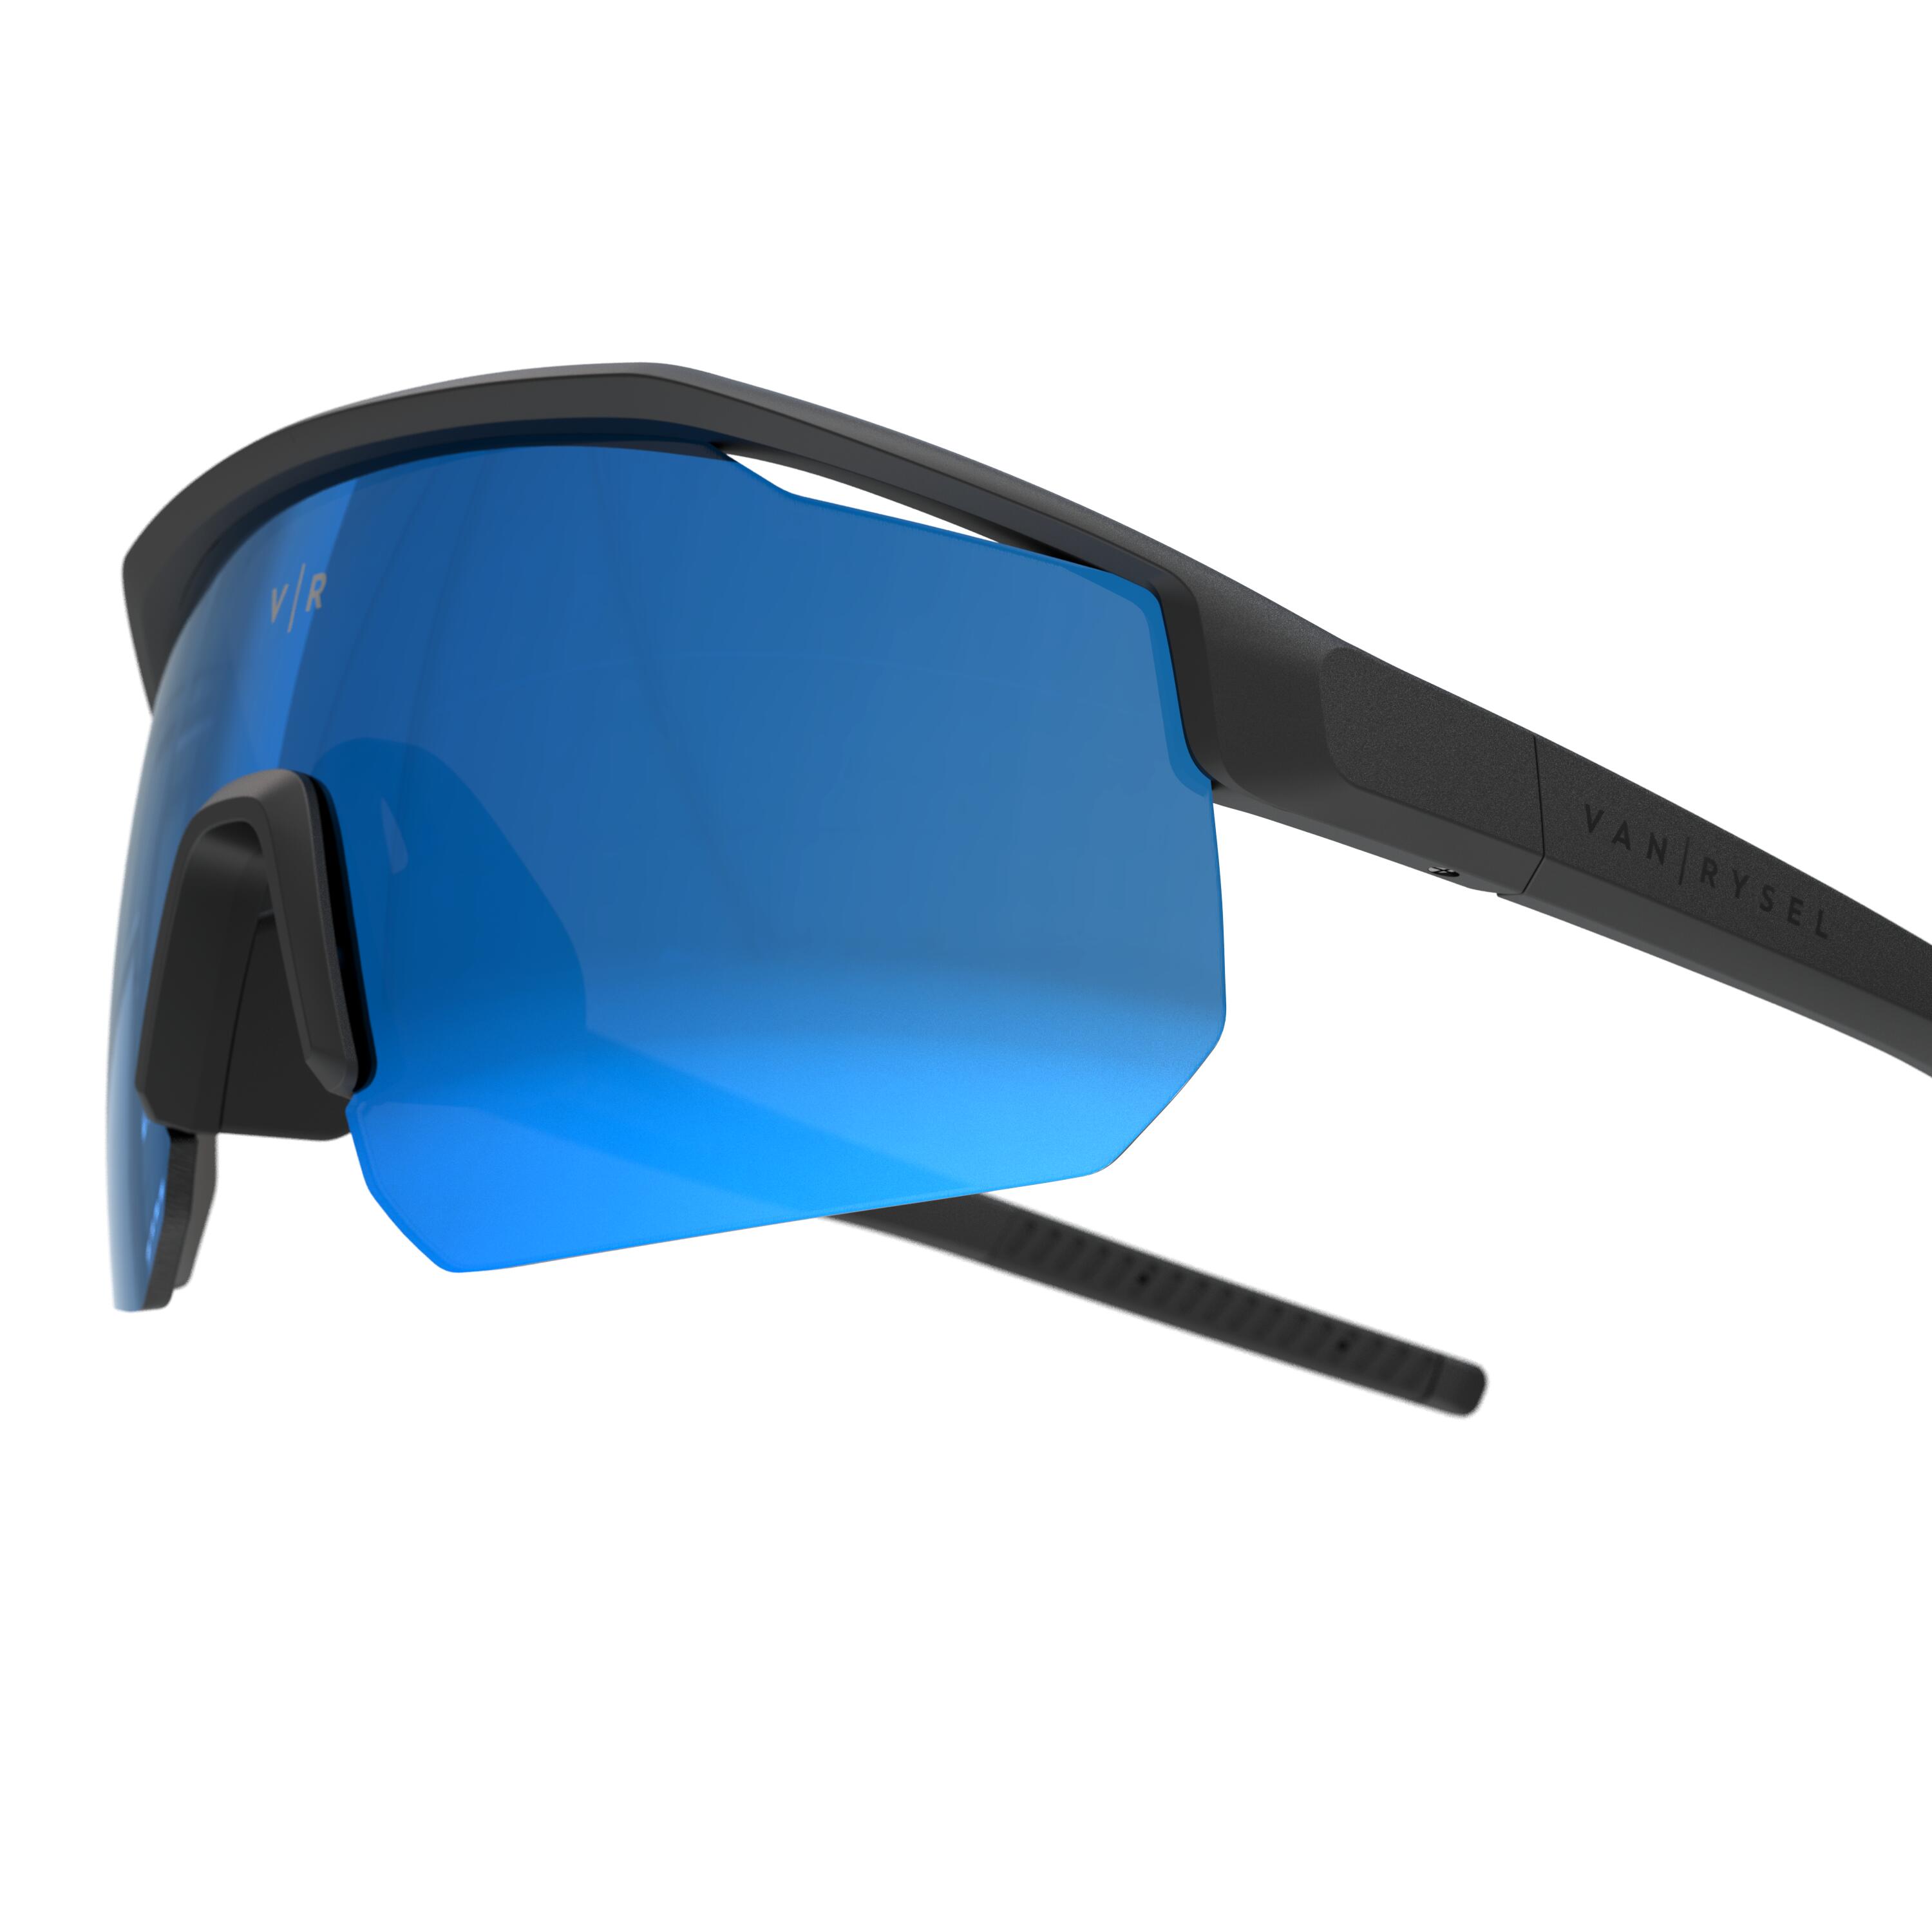 Adult Cycling Glasses Perf 500 Light Category 3 - Black/Blue 4/5